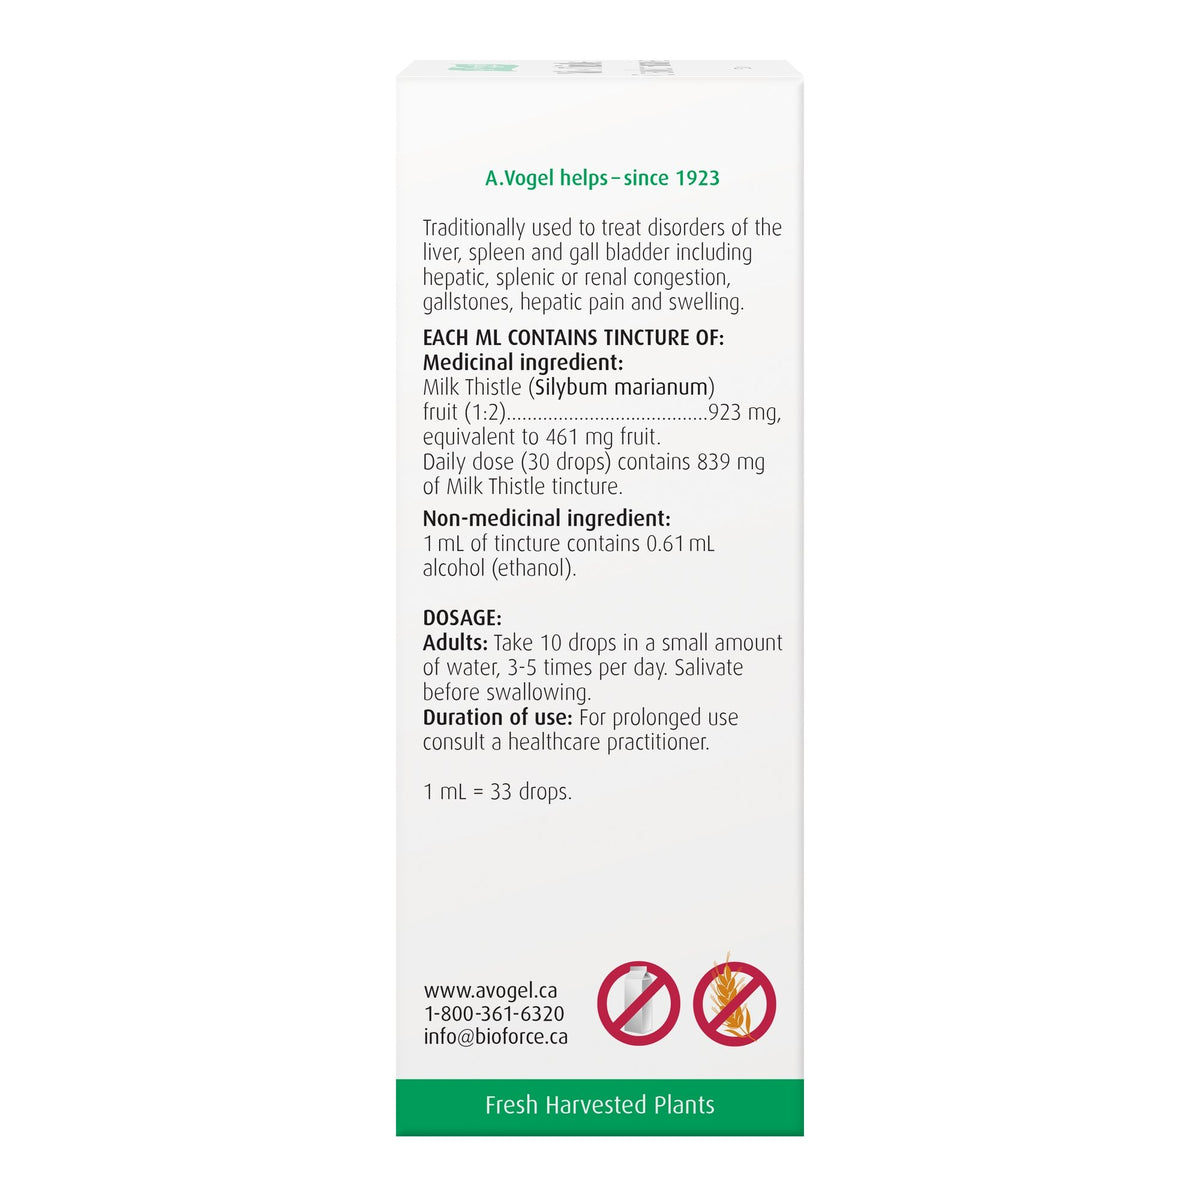 Milk Thistle - Liver Pain and Liver Disorders 50 mL - A.Vogel Canada